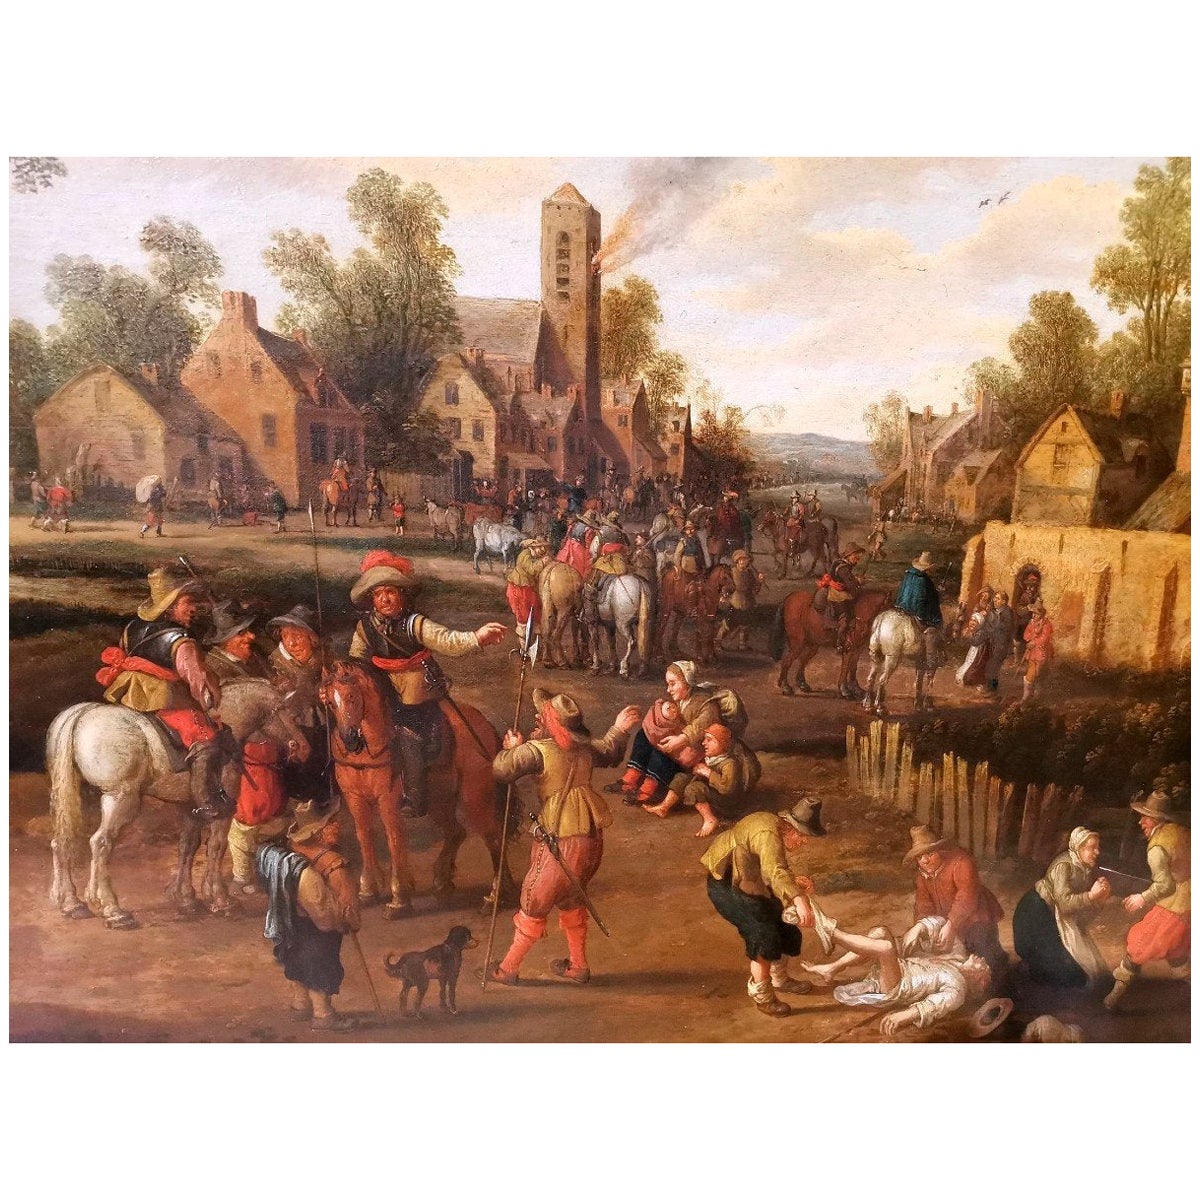 "Soldiers Looting a Village" 17th Century Oil on Panel Dutch School